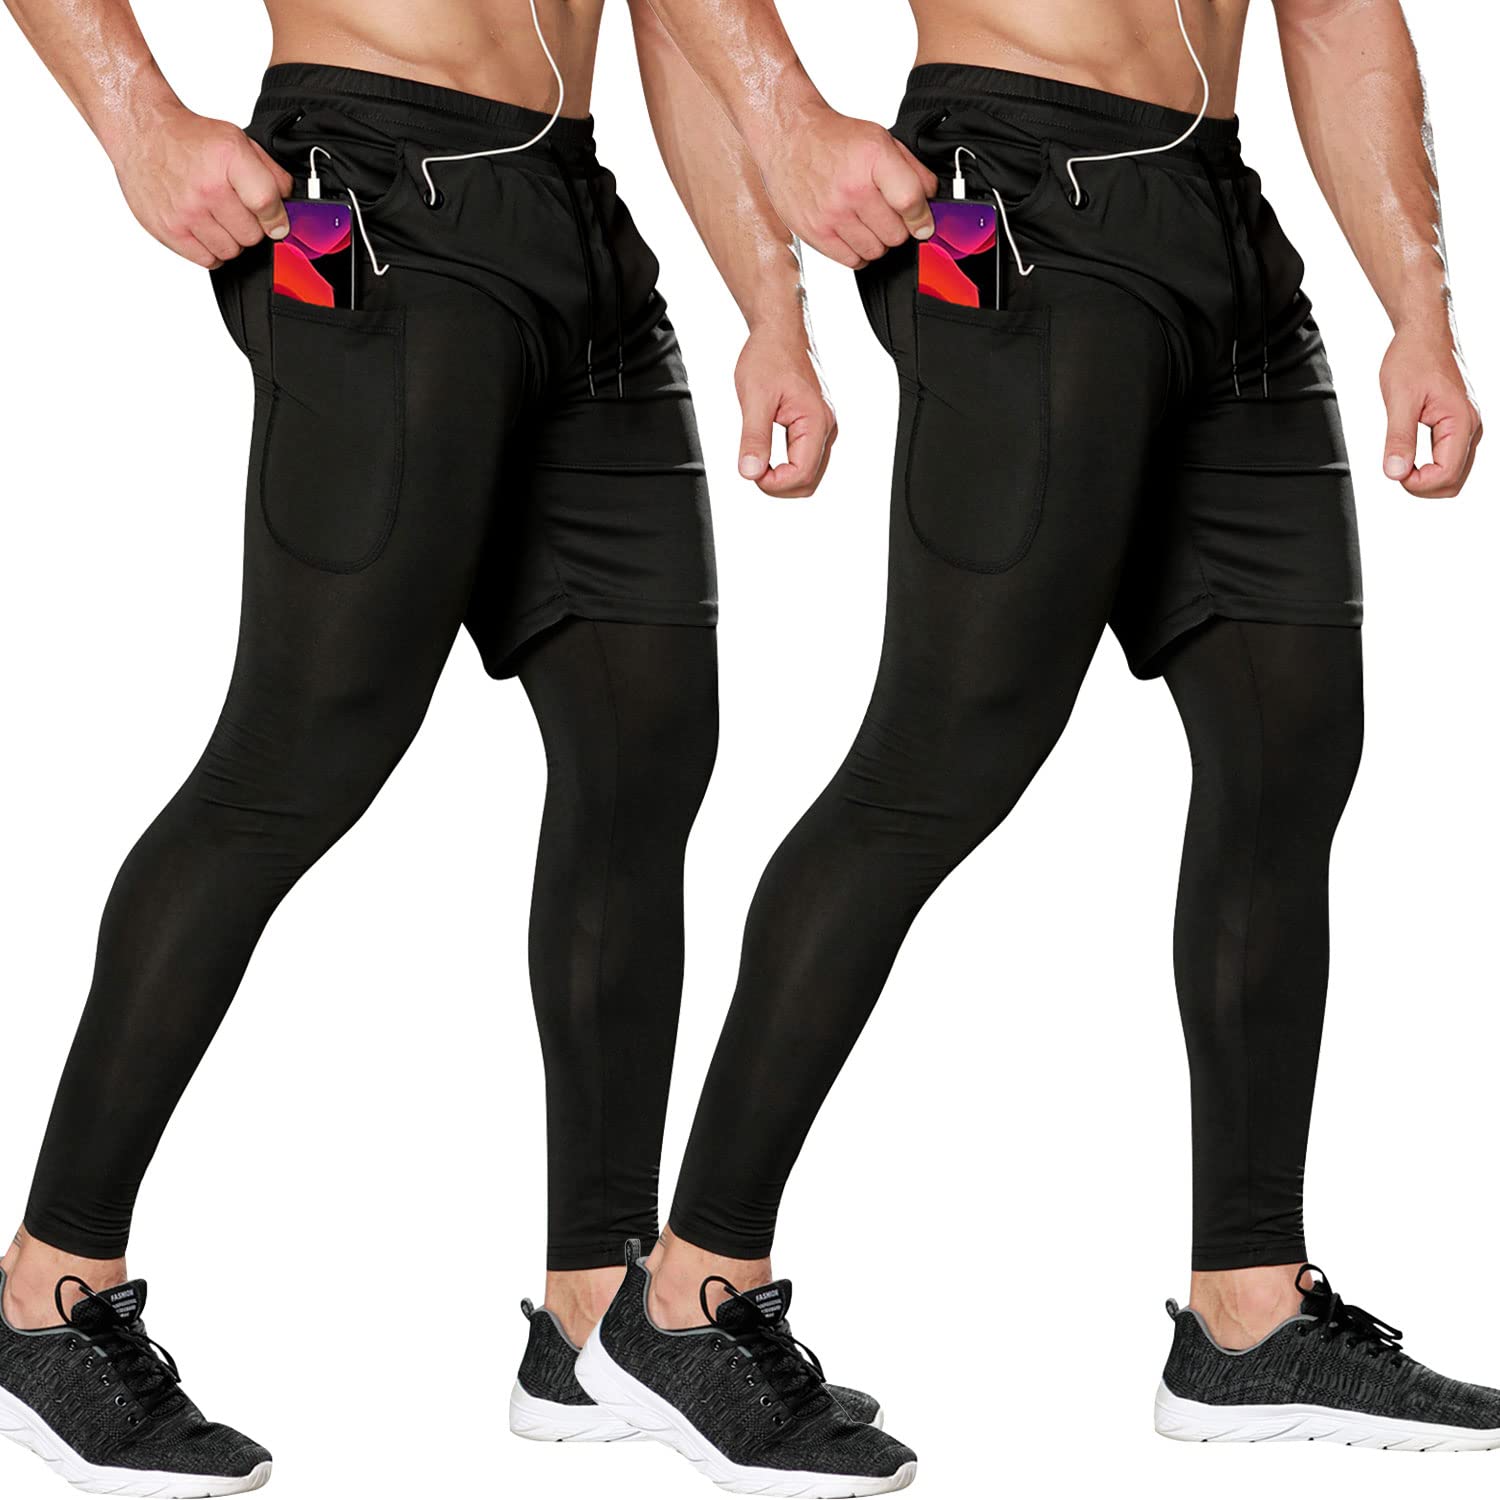 Odoland 2 Pack Mens Compression Running Pants 2 in 1 Quick Dry Athletic  Workout Sweatpants Shorts